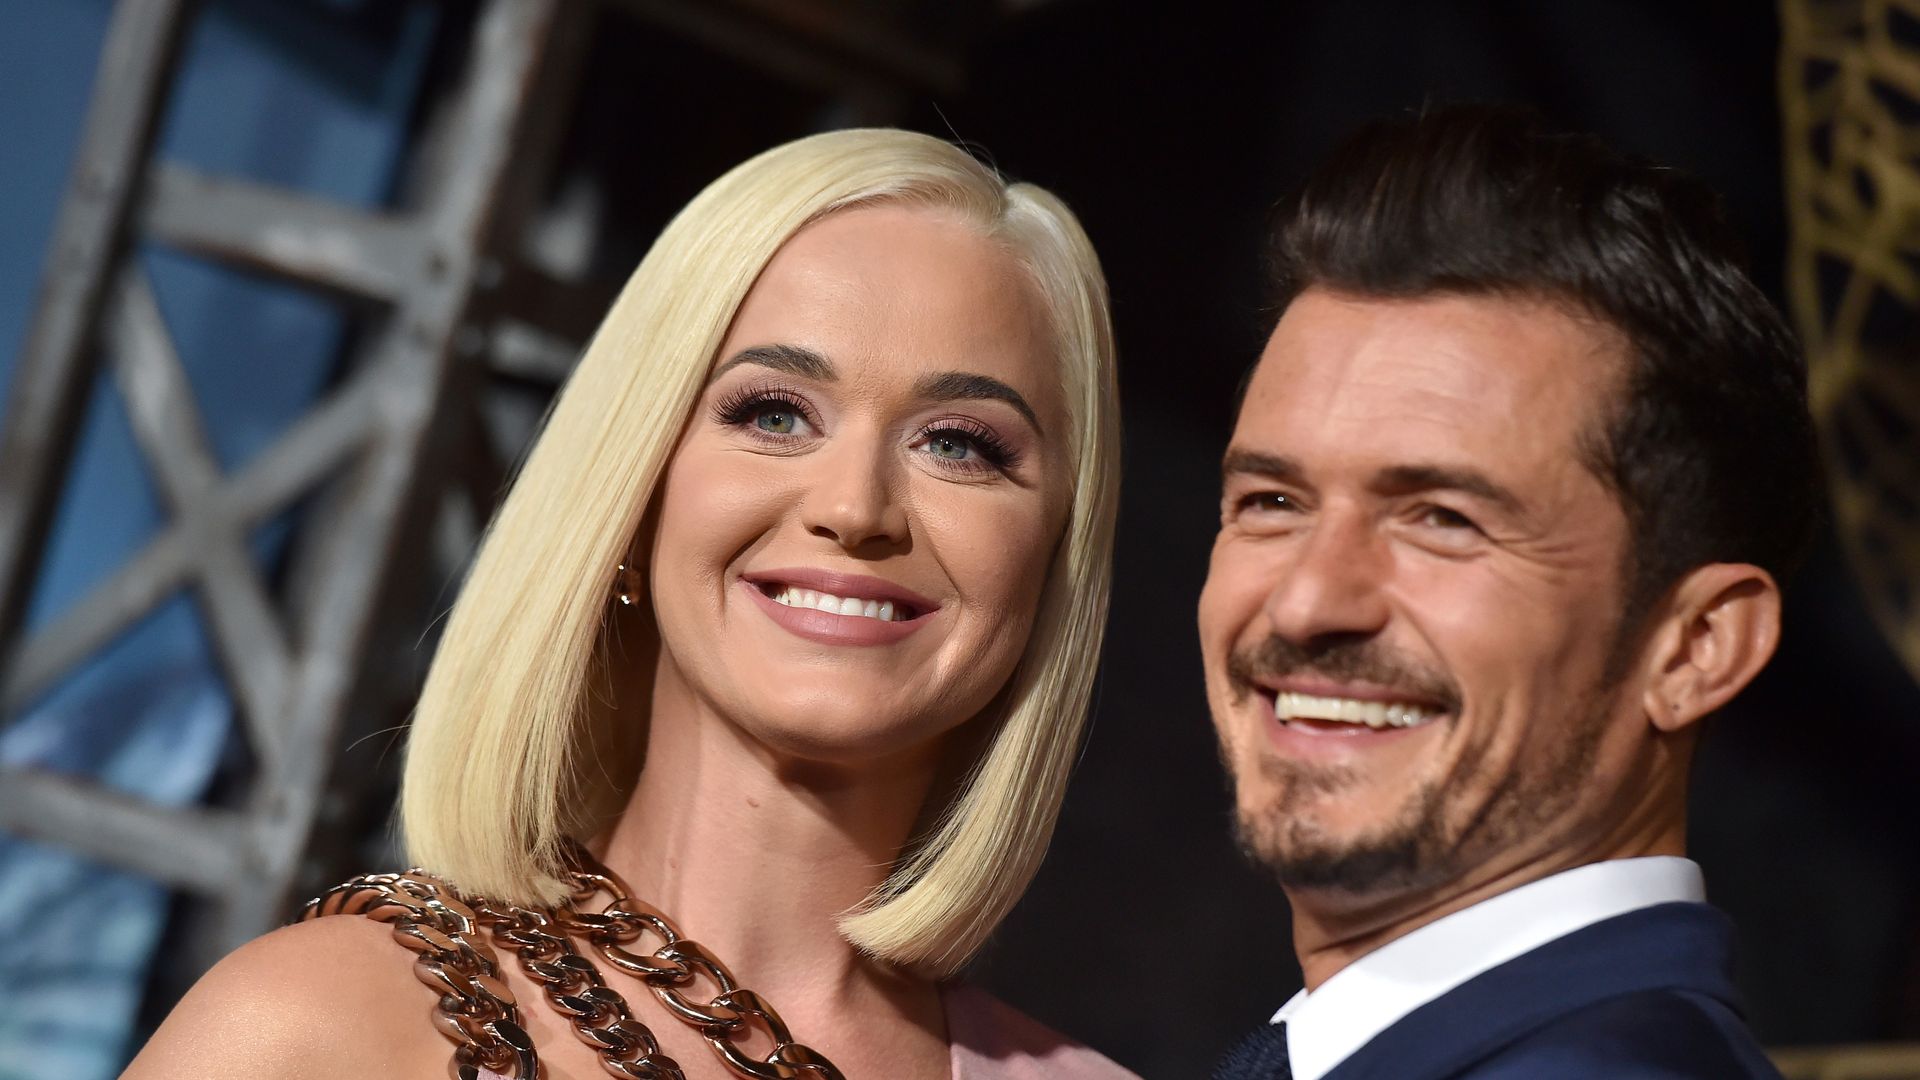 Katy Perry and Orlando Bloom's daughter Daisy Dove's personality